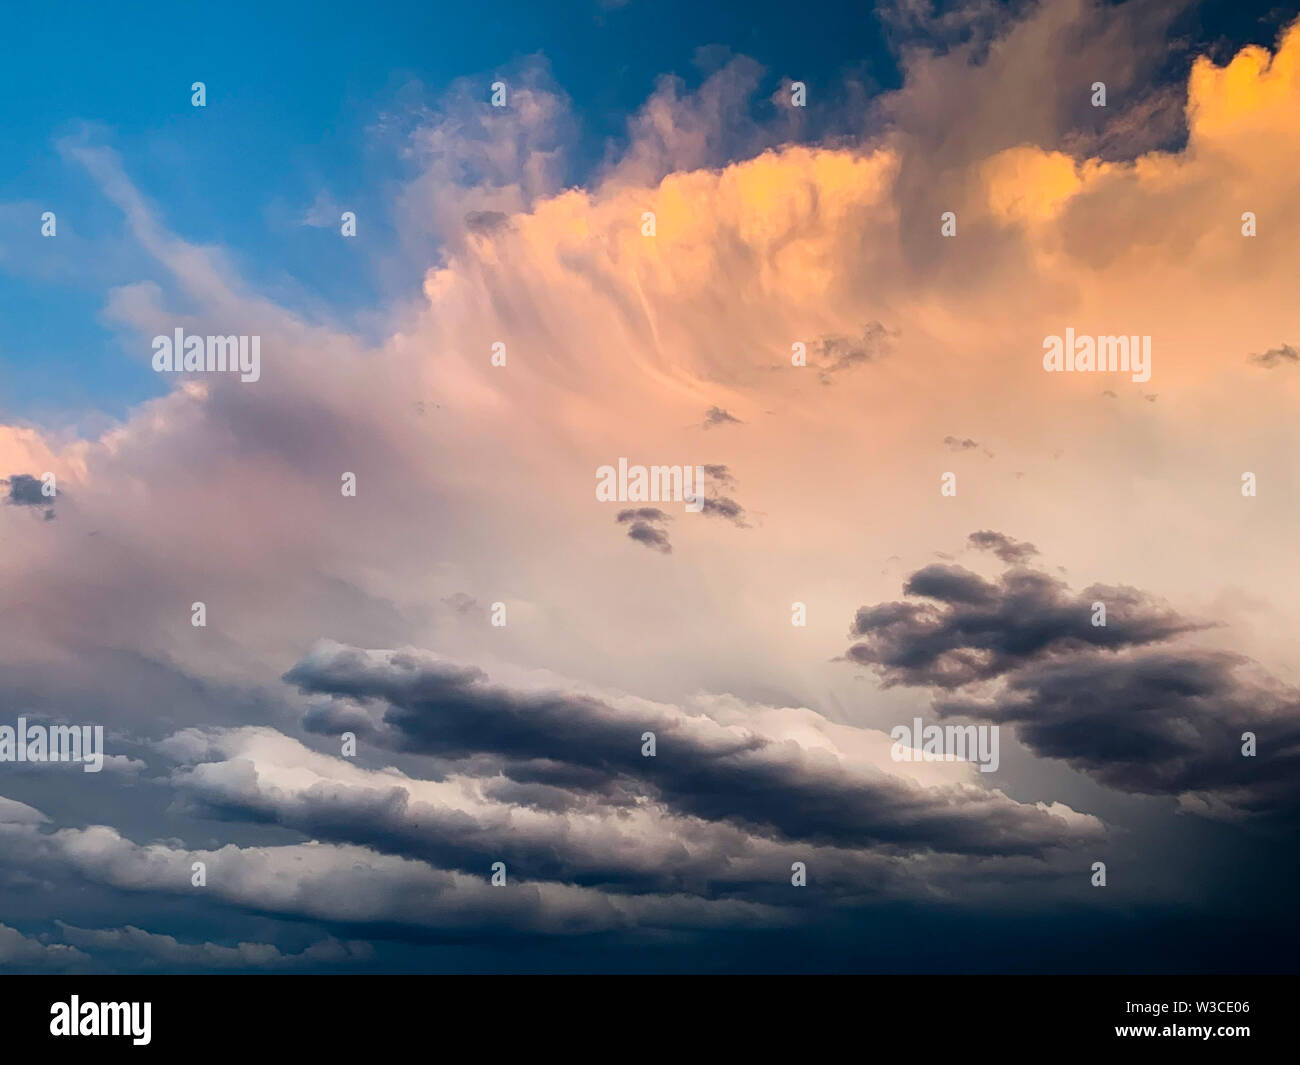 Dramatic evening sky with orange and dark storm clouds against the blue sky. Concept of upcoming storm and beautiful backdrop Stock Photo